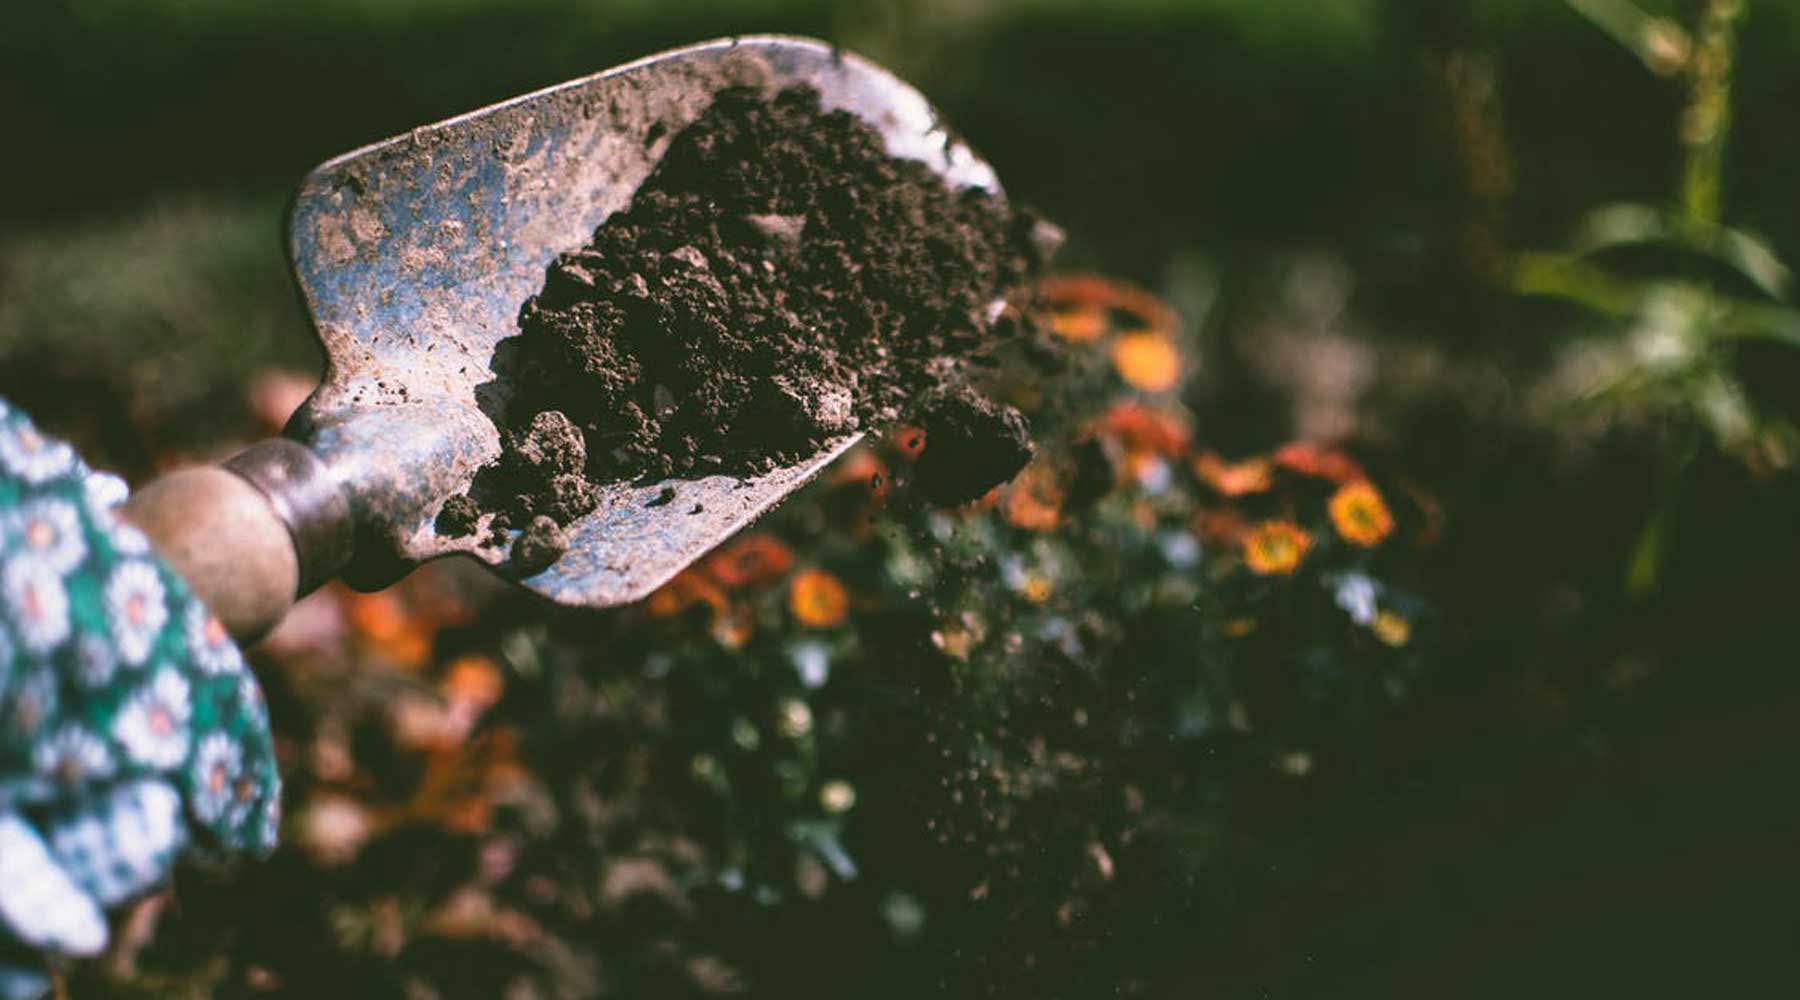 How To Compost In Your Garden